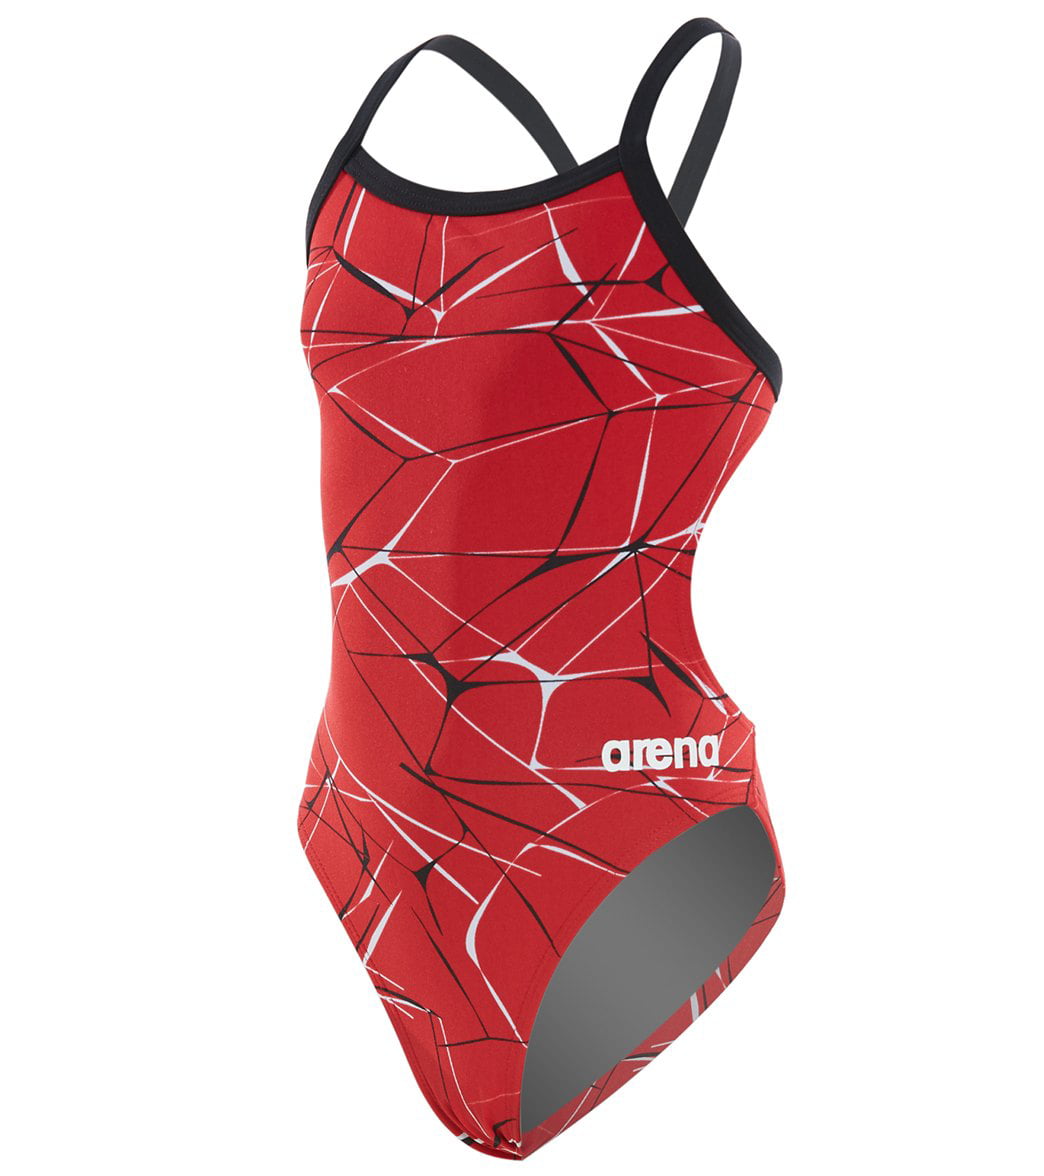 Arena Girls Polycarbonite One Piece Swimsuit 